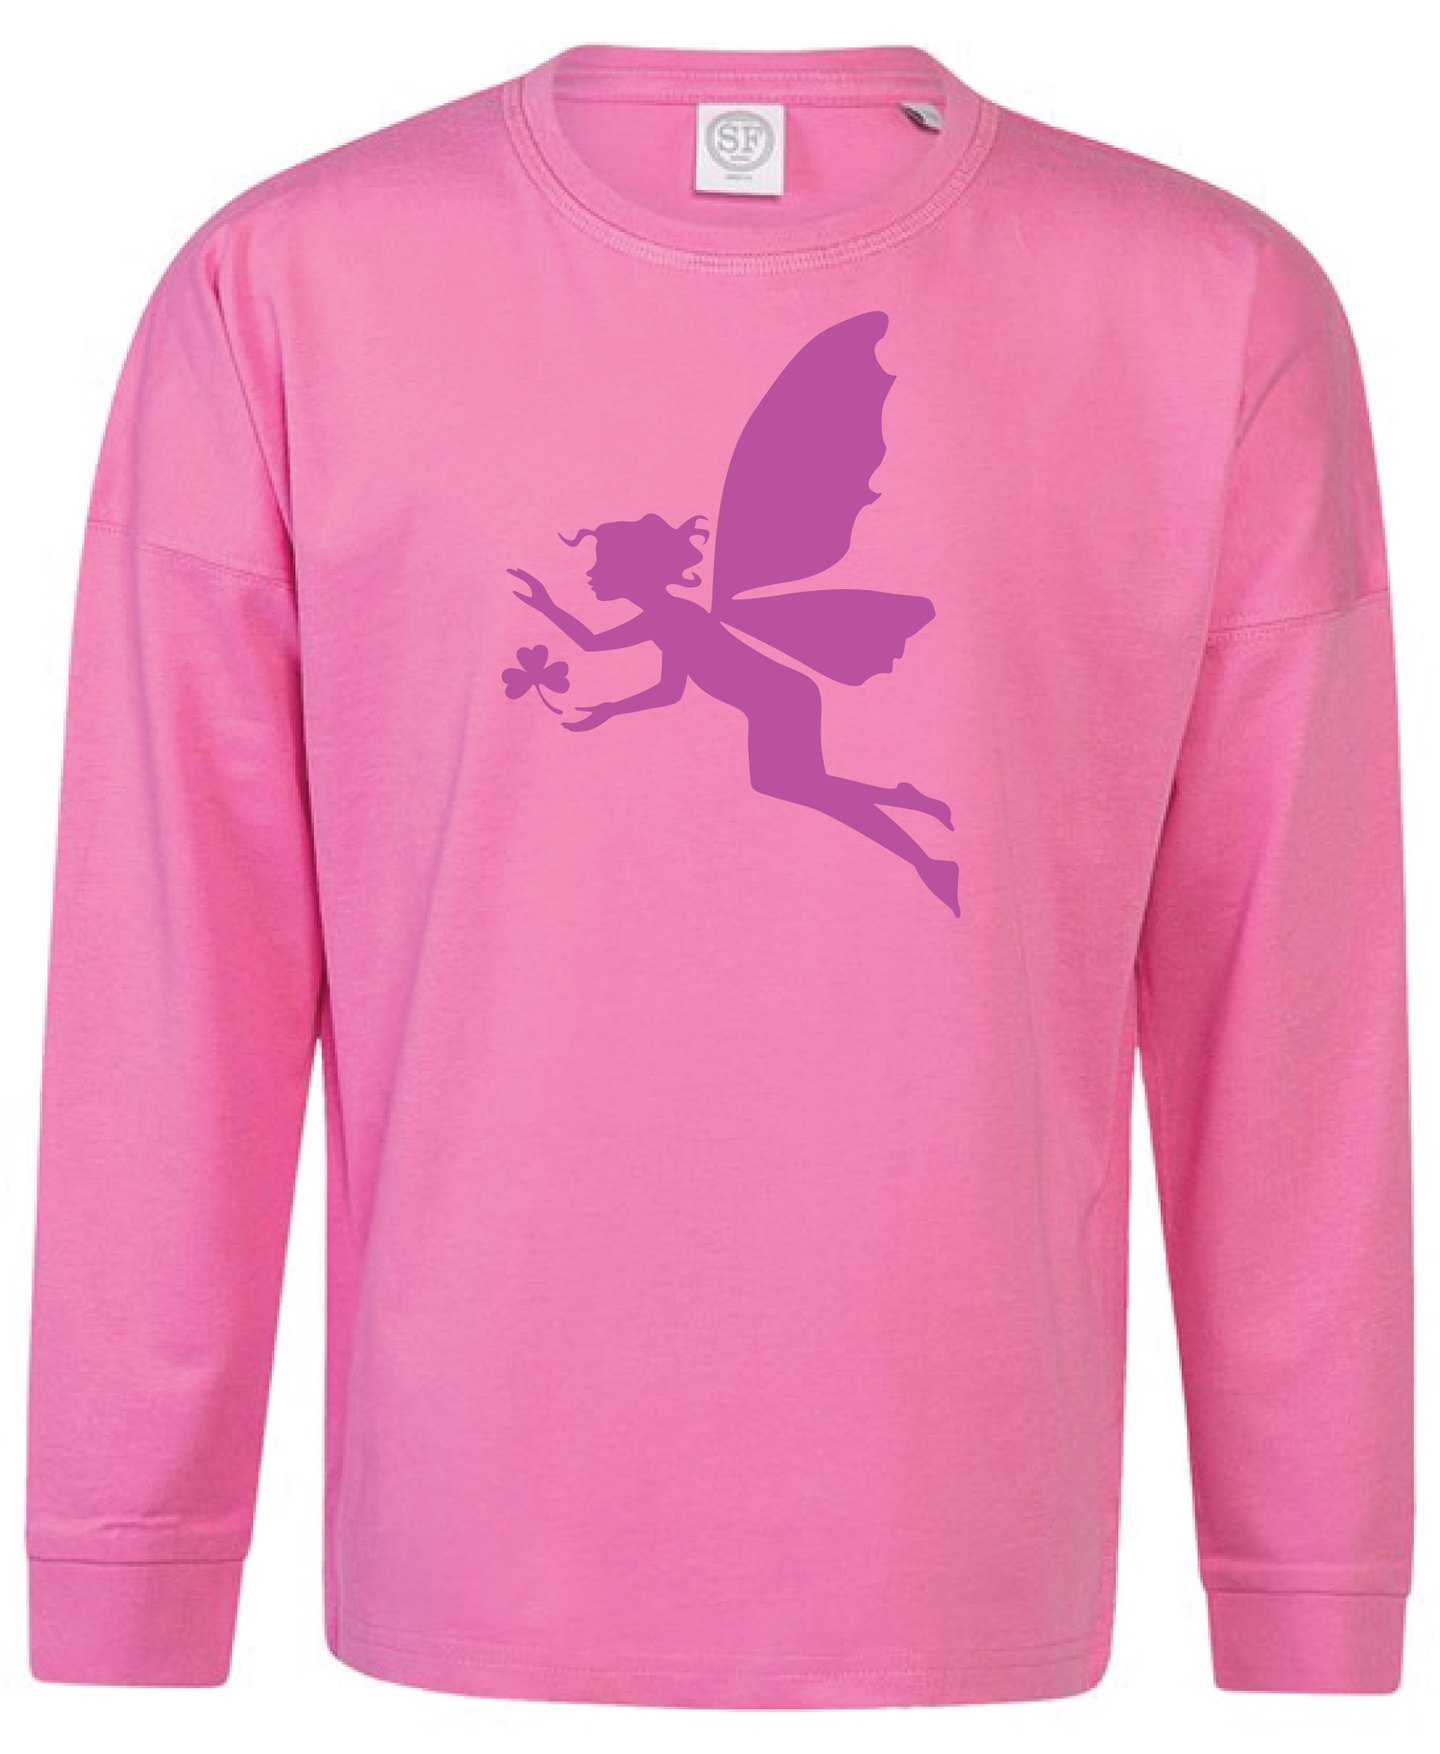 Girls Pink 100% Cotton long sleeve top with Cerise Fairy flock print.